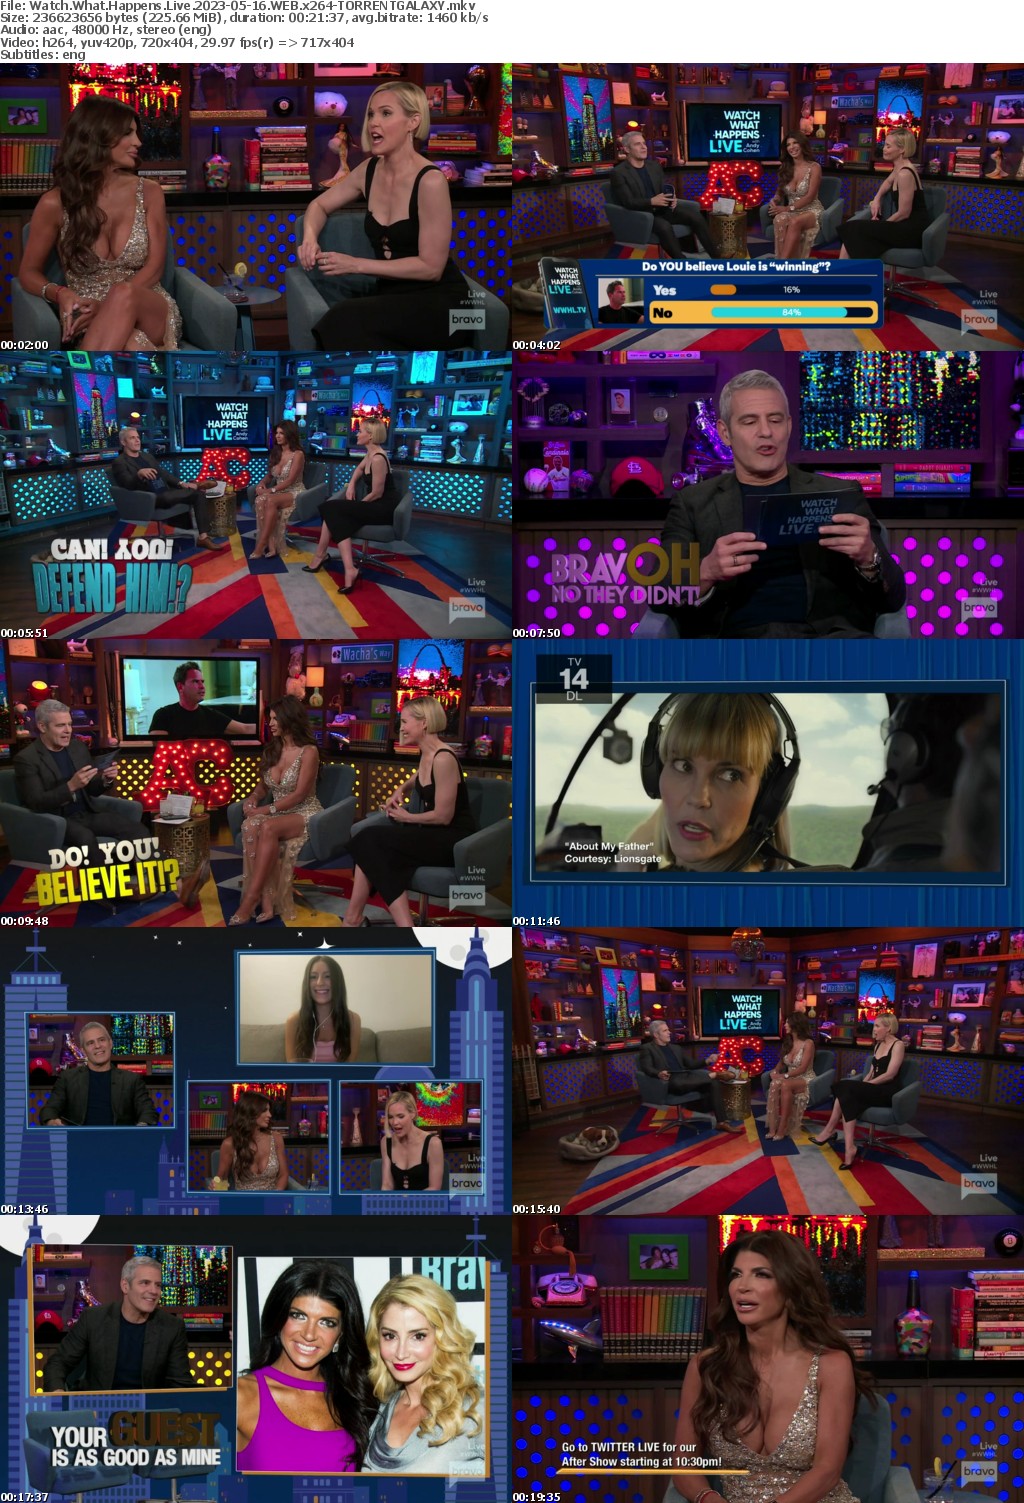 Watch What Happens Live 2023-05-16 WEB x264-GALAXY